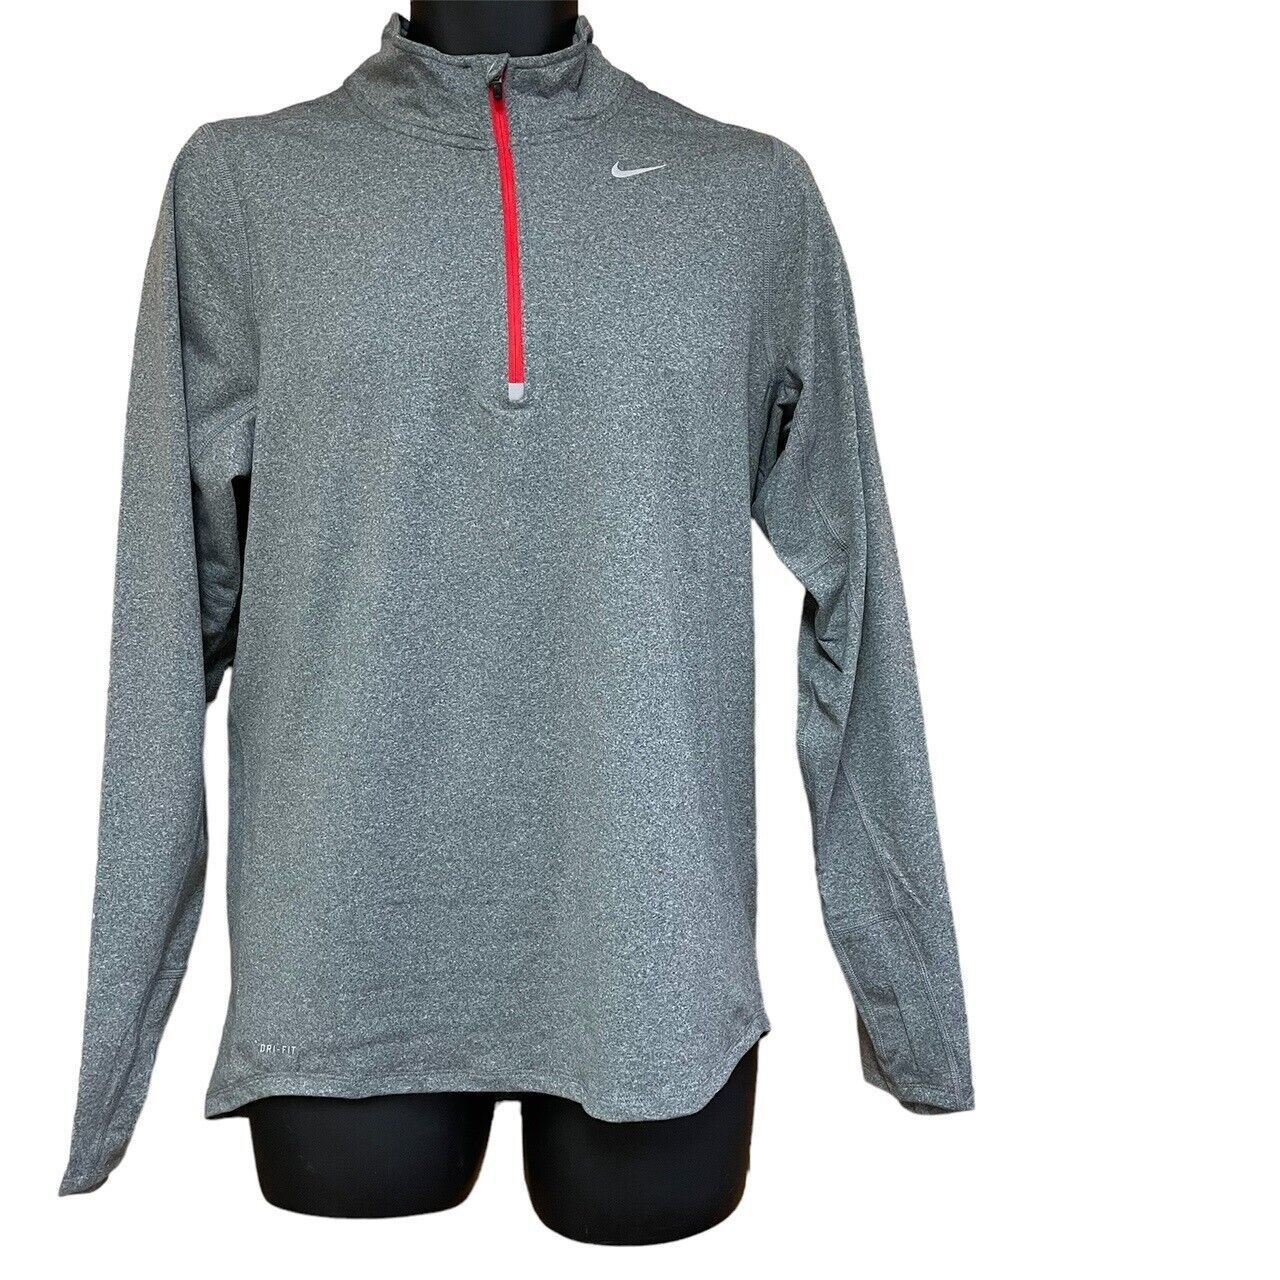 Primary image for Nike Mens Element Dri Fit Half Zip Running Top Reflective Sz Small 504606 New